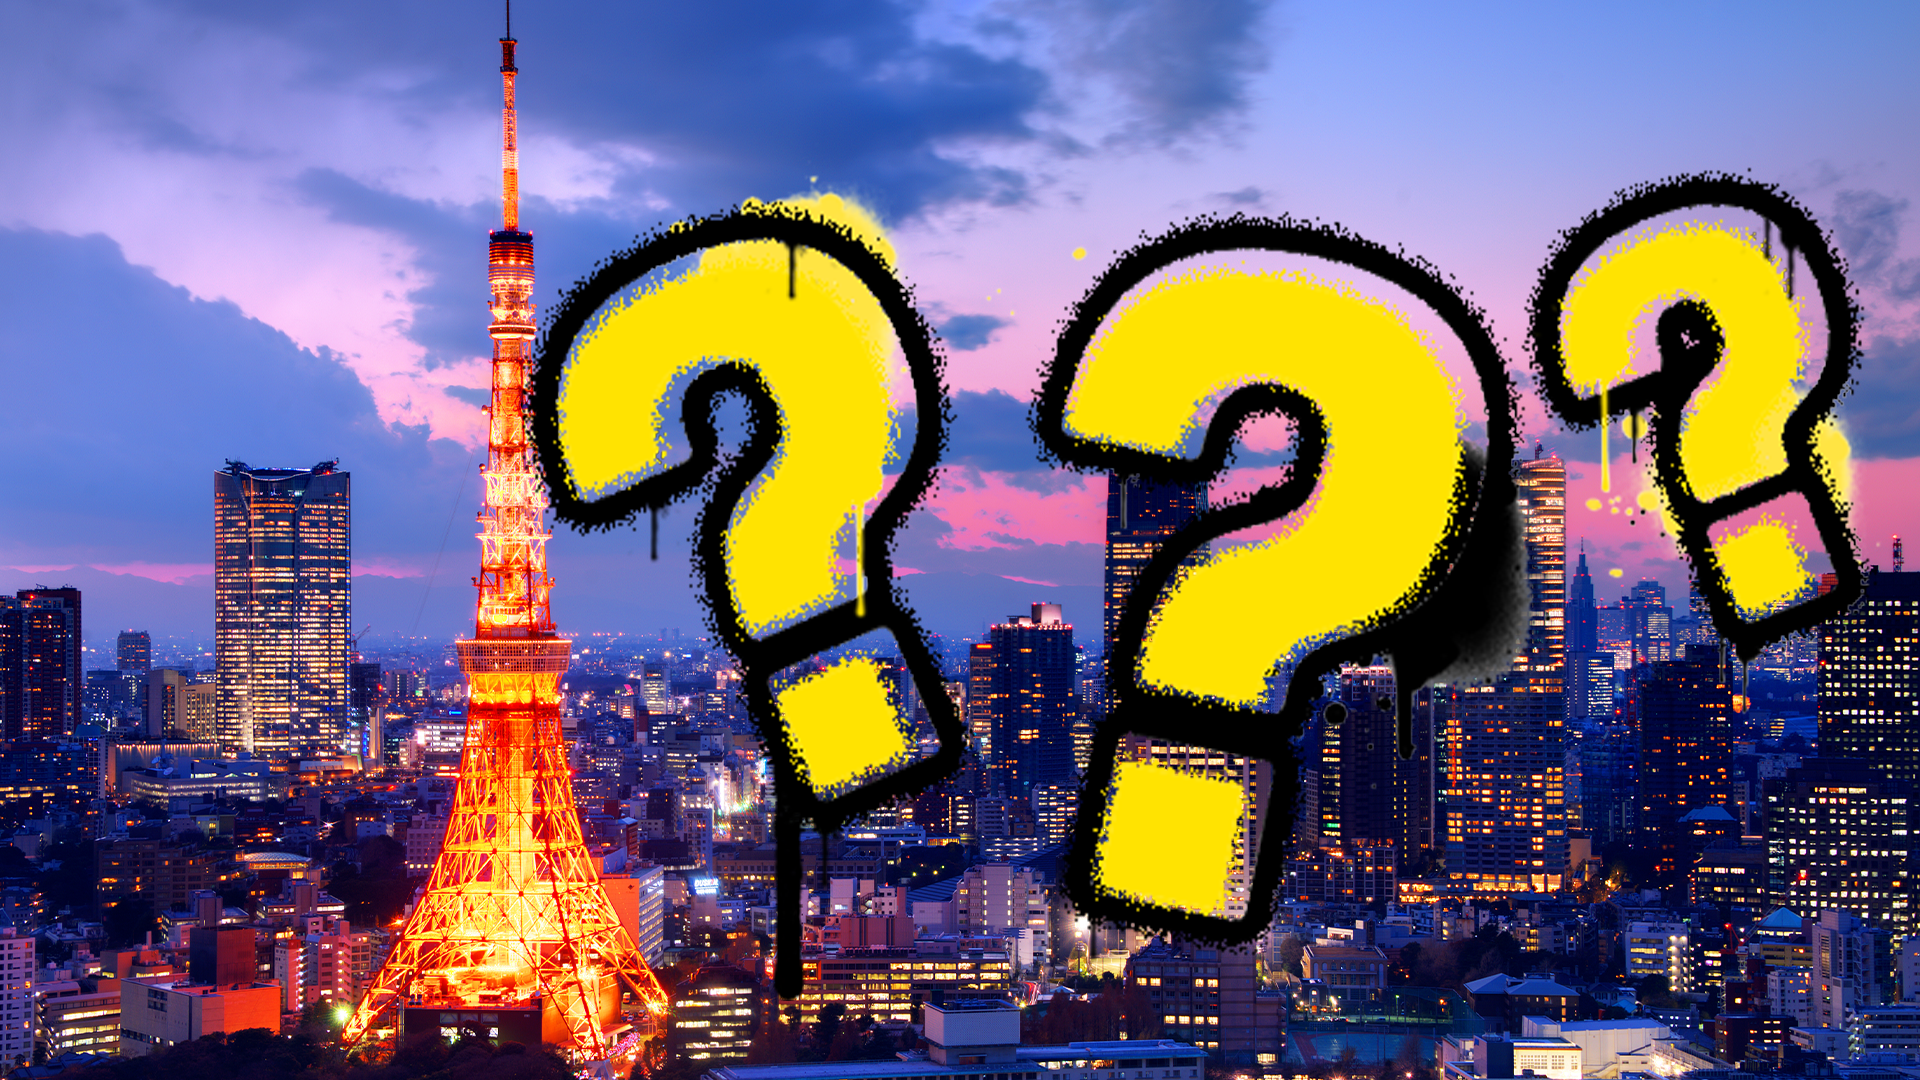 Tokyo and question marks